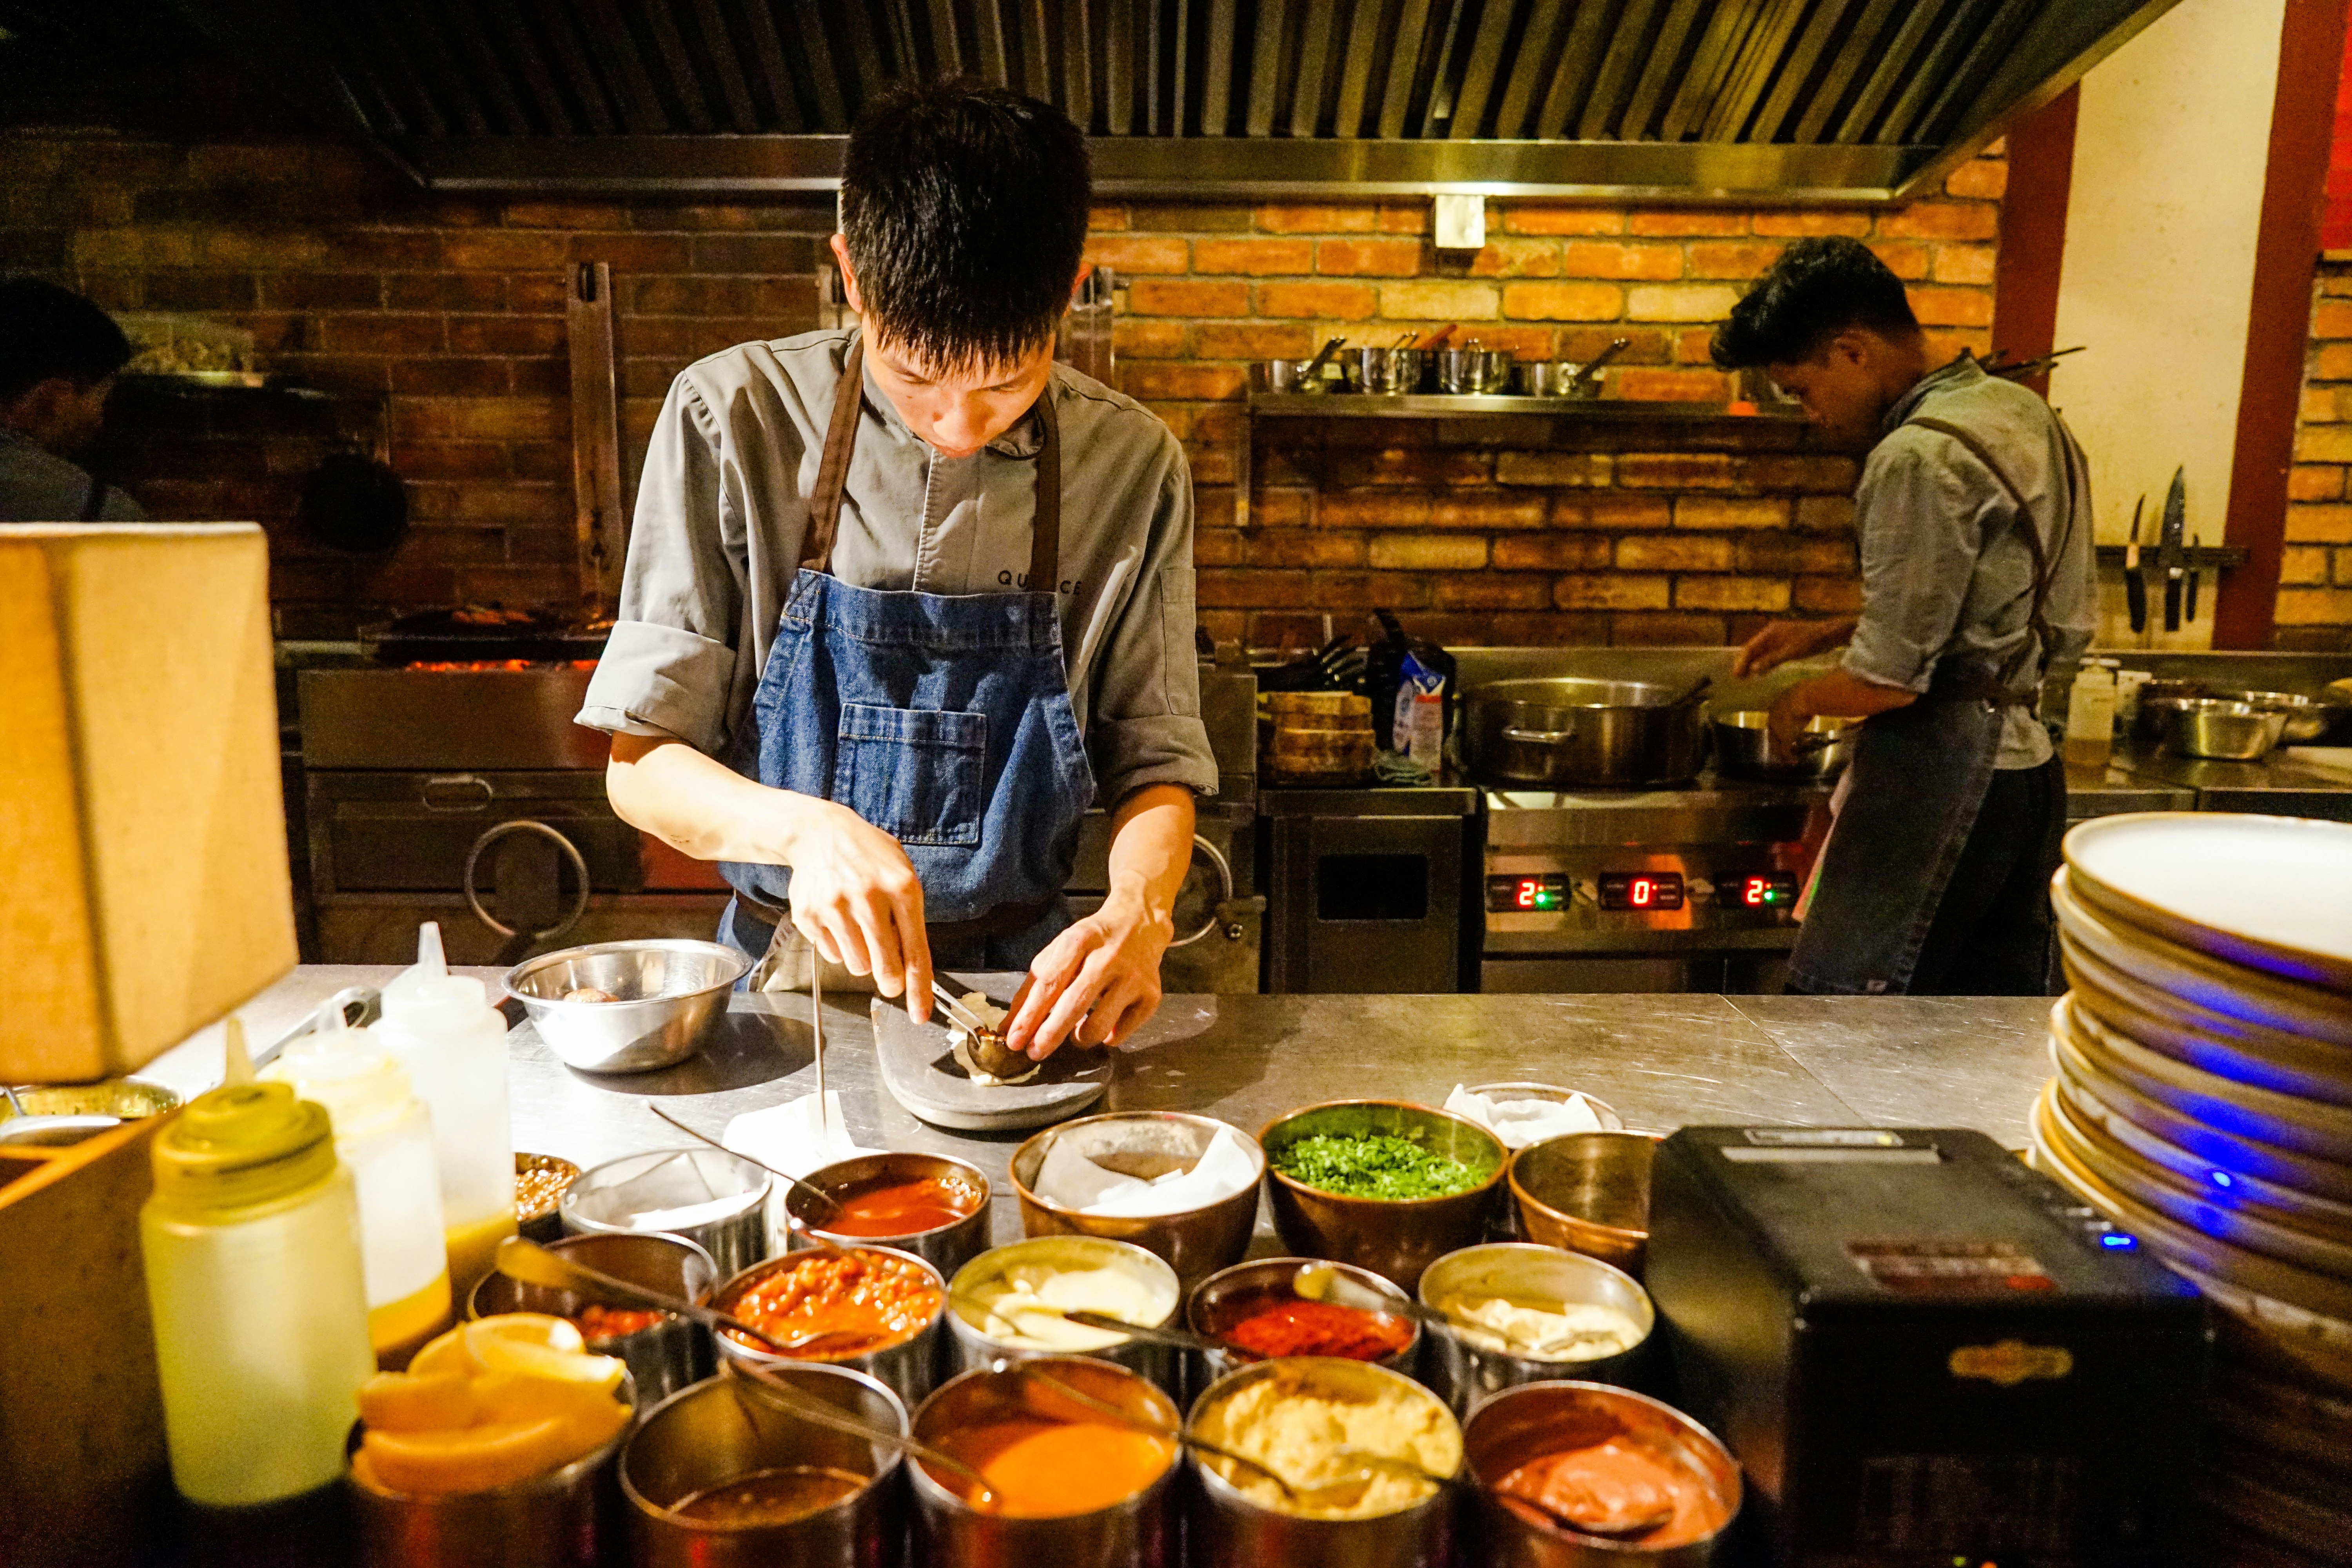 A chef plates a dish in a kitchen at Quince Eatery in Ho Chin Minh City. In front of the cook is a tray filled with an assortment of sauces. In the background, a man works over a pan.